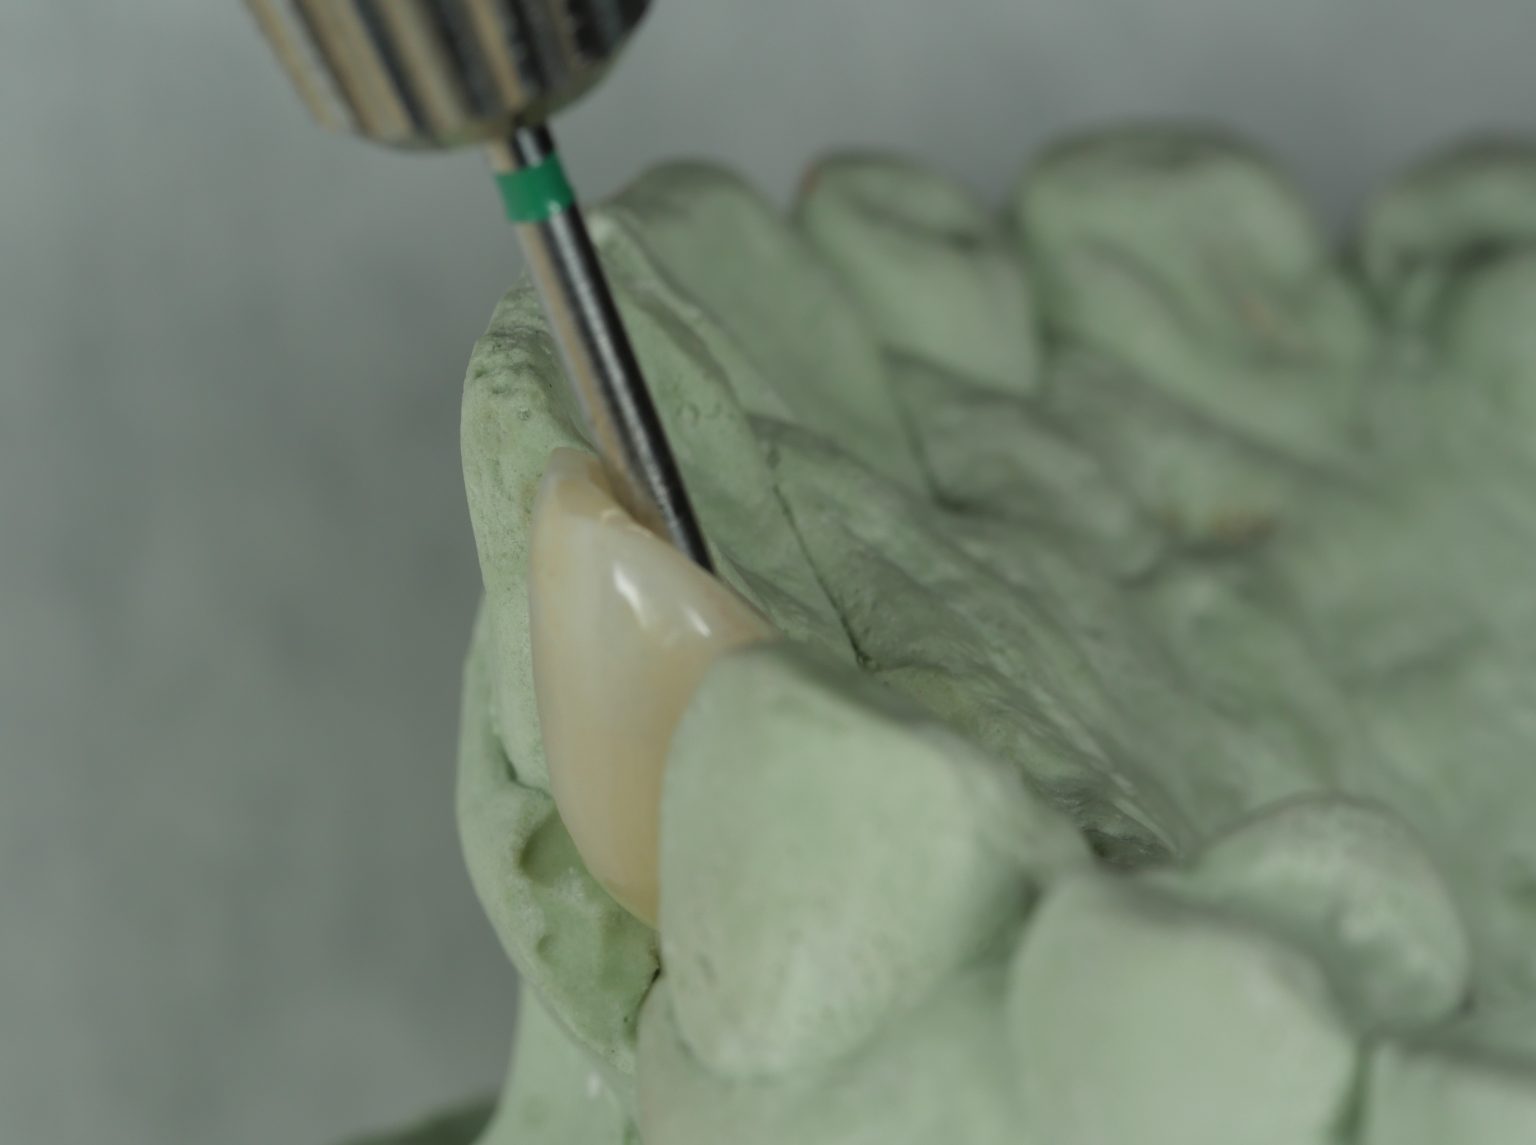 Fig. 15: Lateral view of the prosthesis showing the angulated screw system screwdriver in the access hole. The screwdriver can engage the screw through the access hole on the palatal surface of the prosthesis after the screw channel angulation has been changed